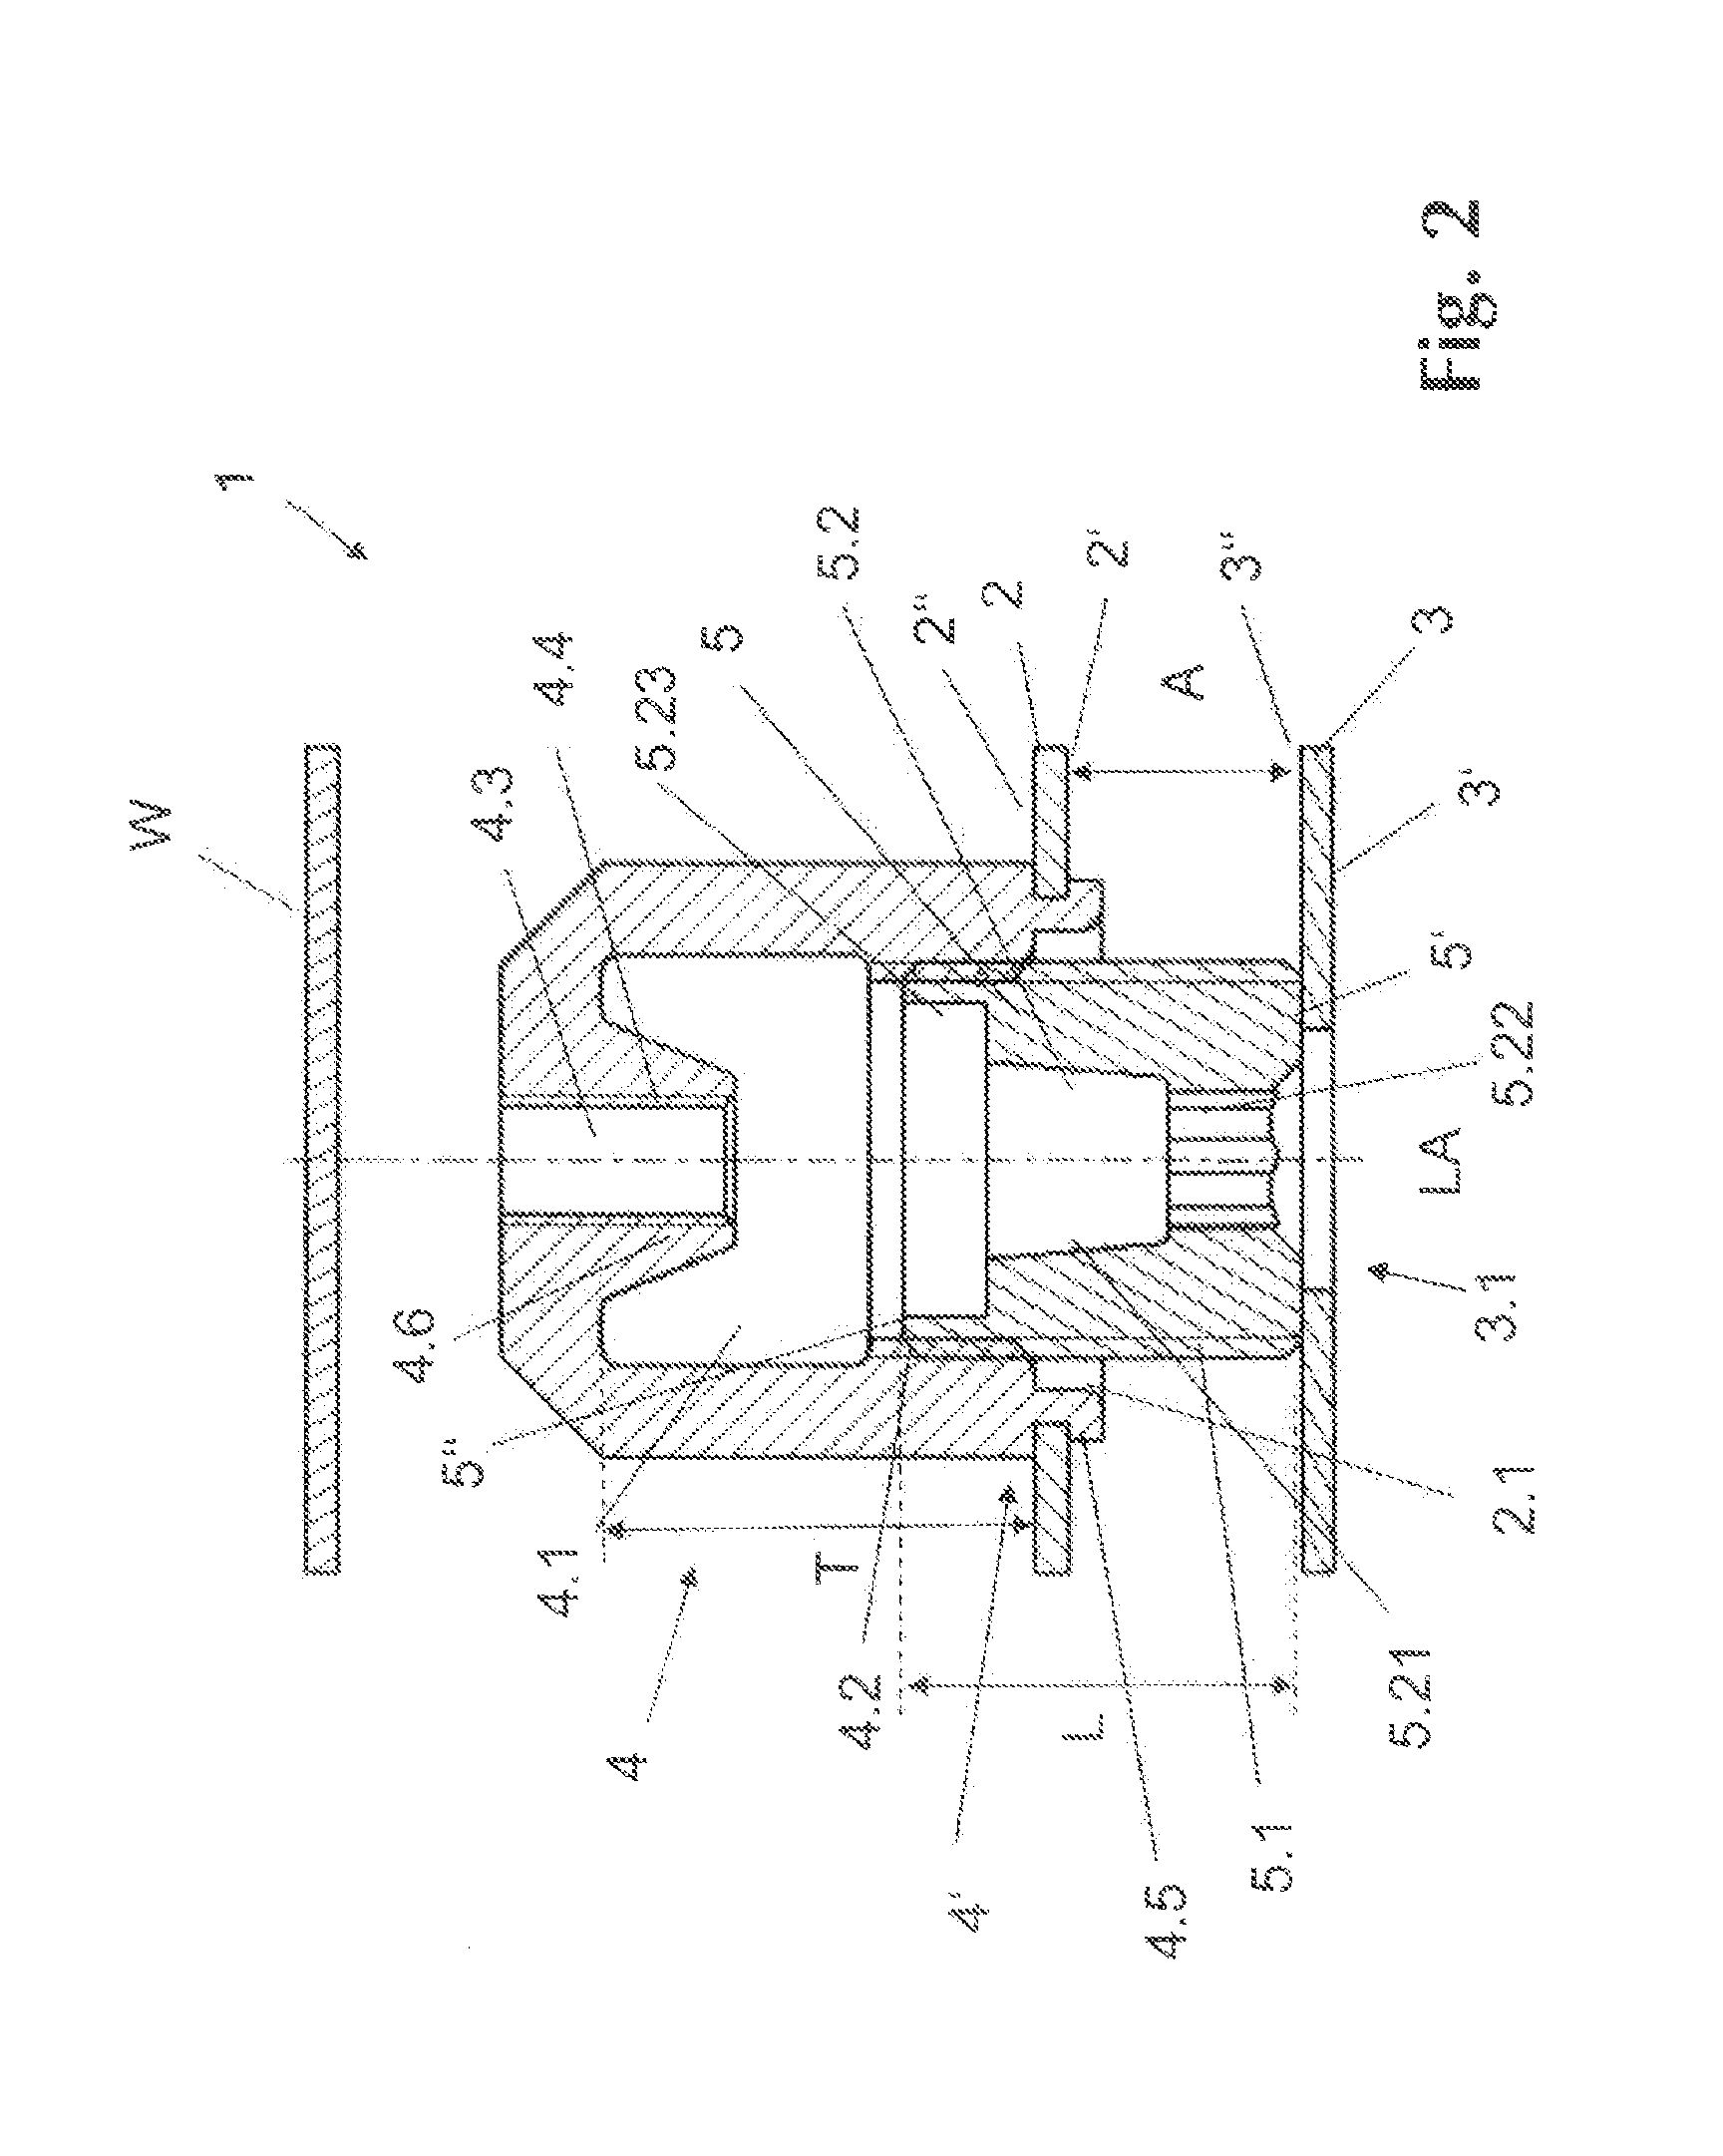 Adjustable fastening device and method for producing a prefabricated subassembly from at least one adjustable fastening device and a component